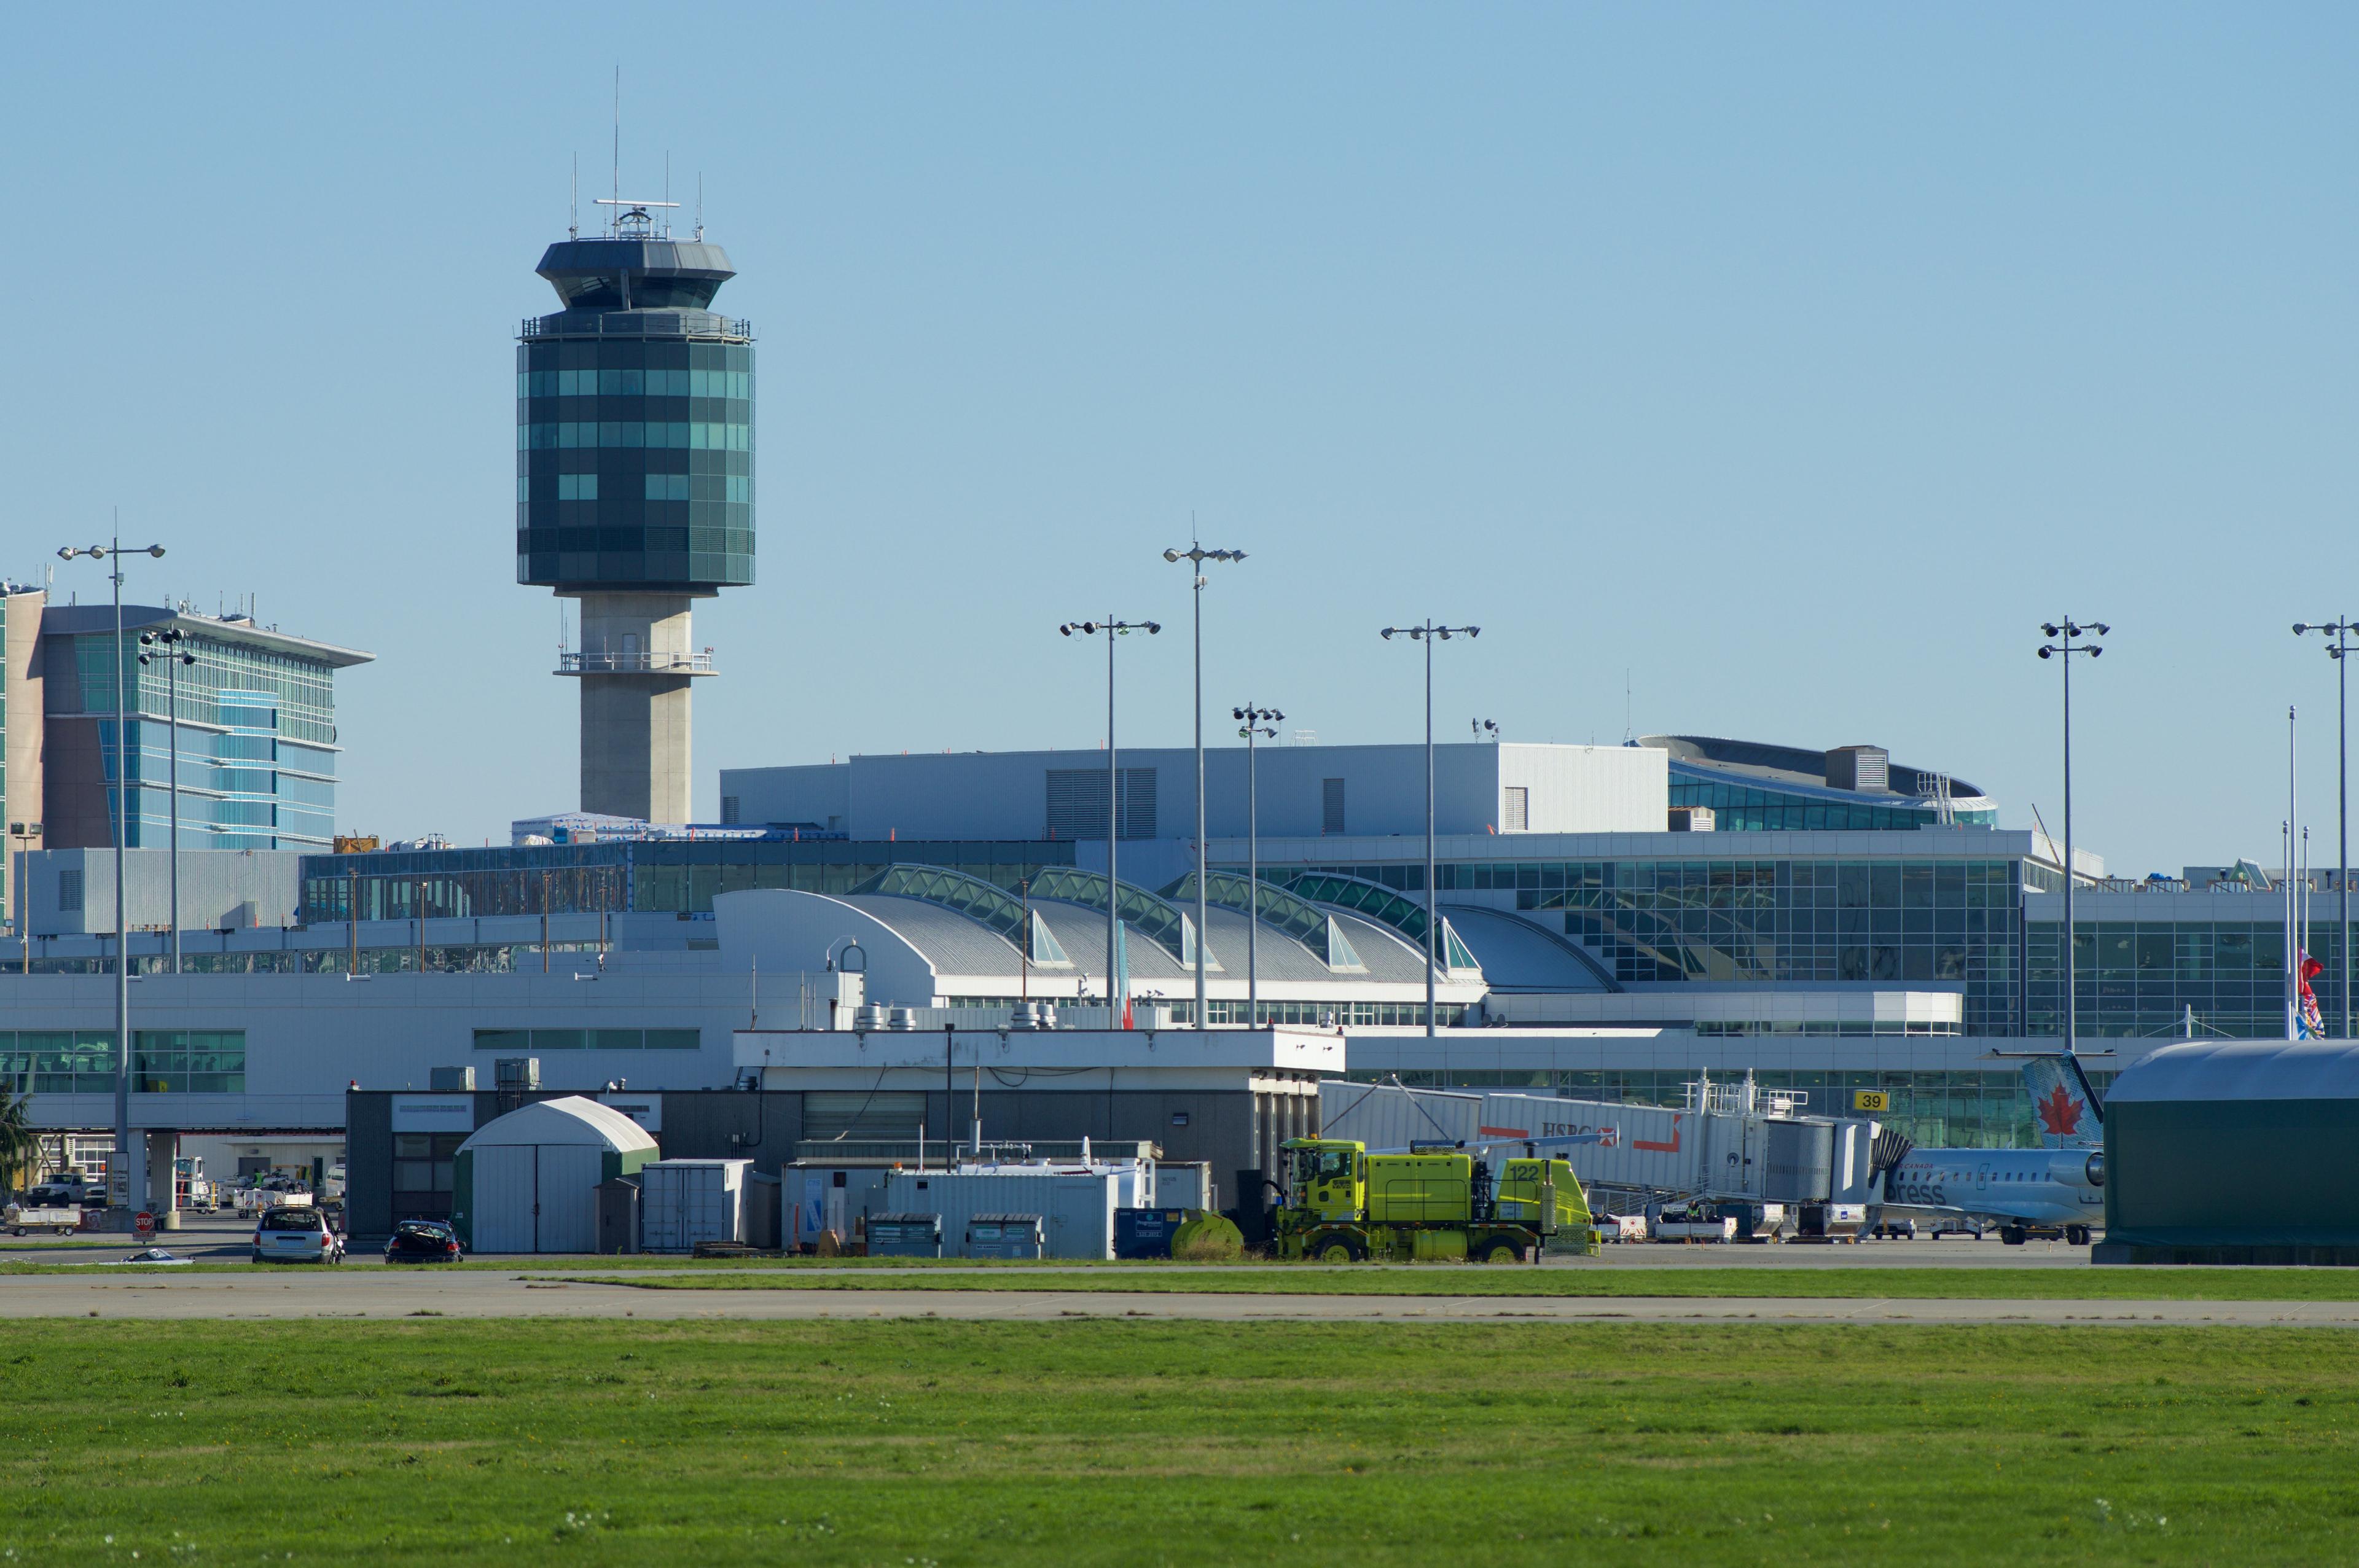 Exterior image of an airport